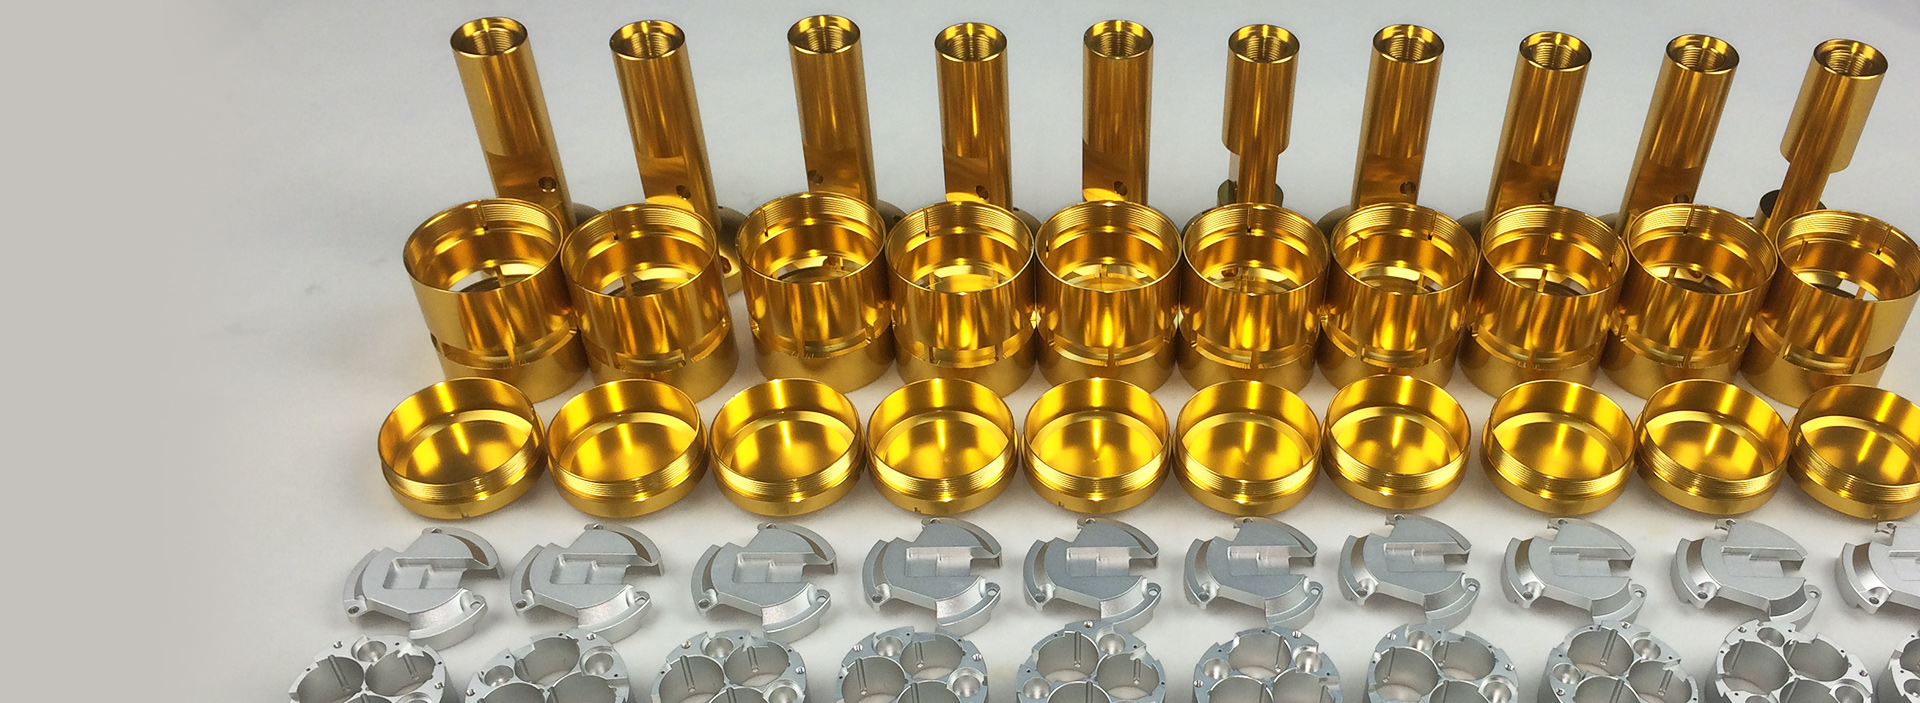 Our CNC machining service can get your design models into real parts within 3 days, including air shipping